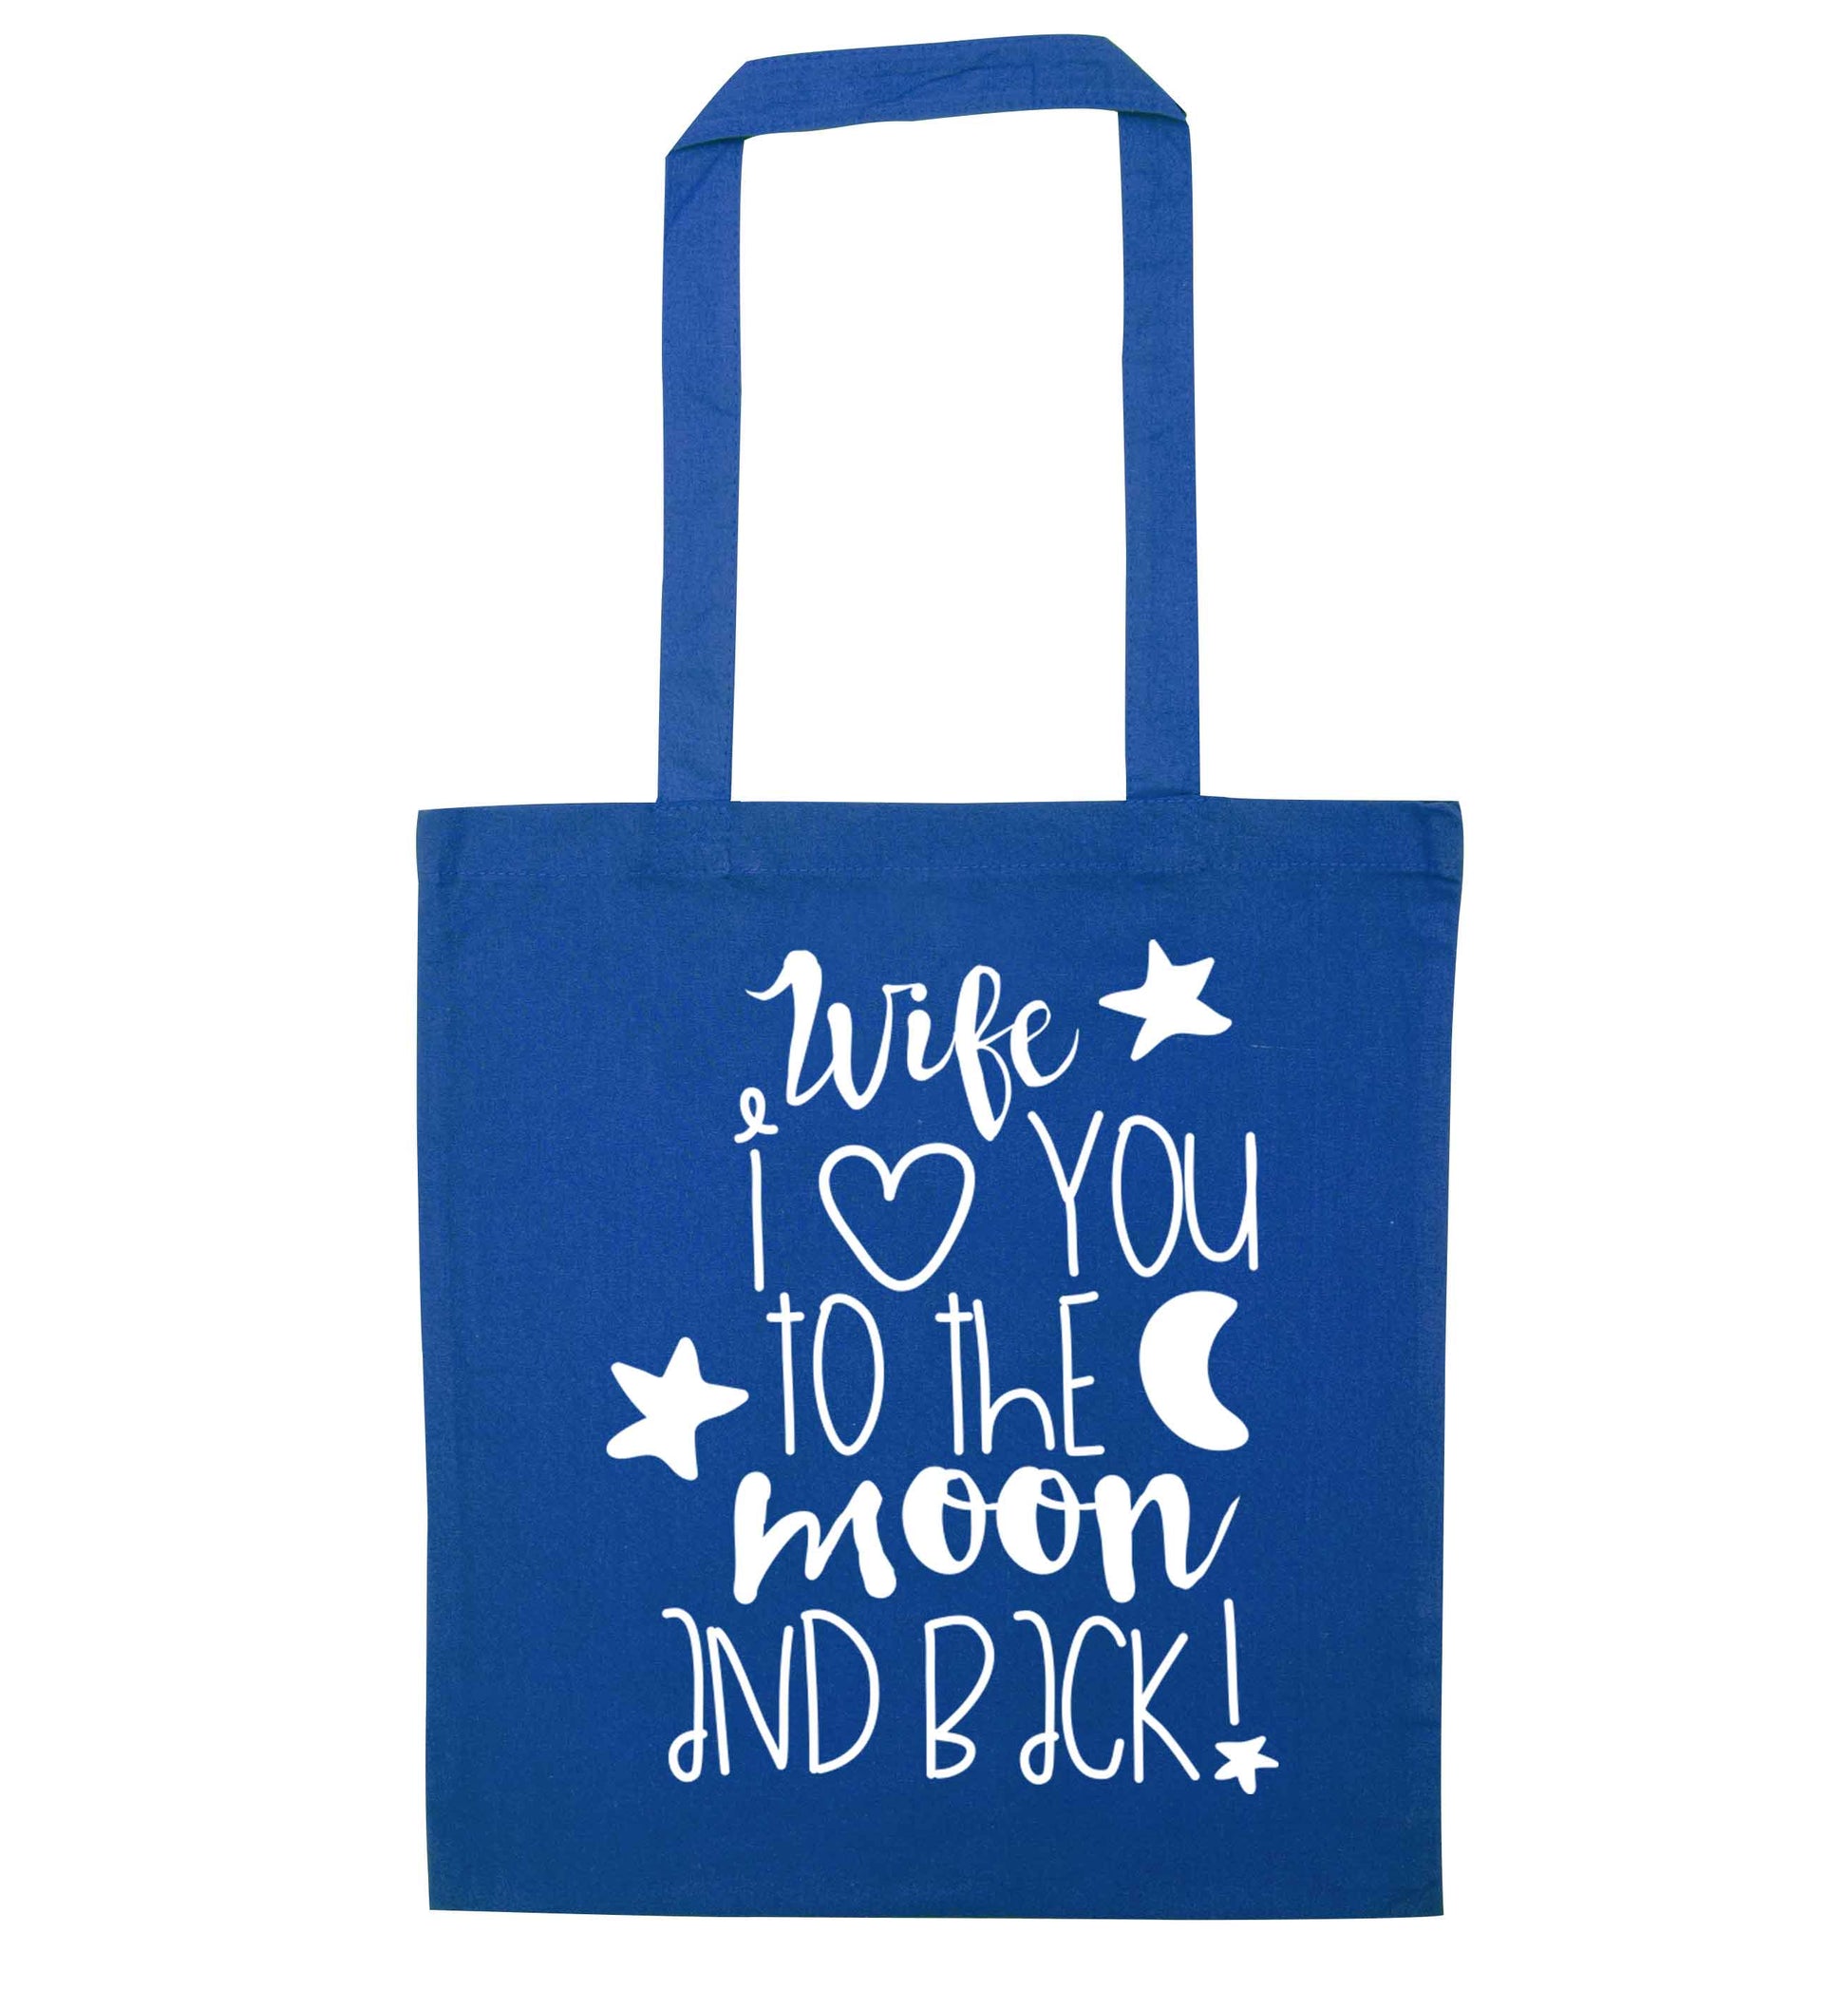 Wife I love you to the moon and back blue tote bag